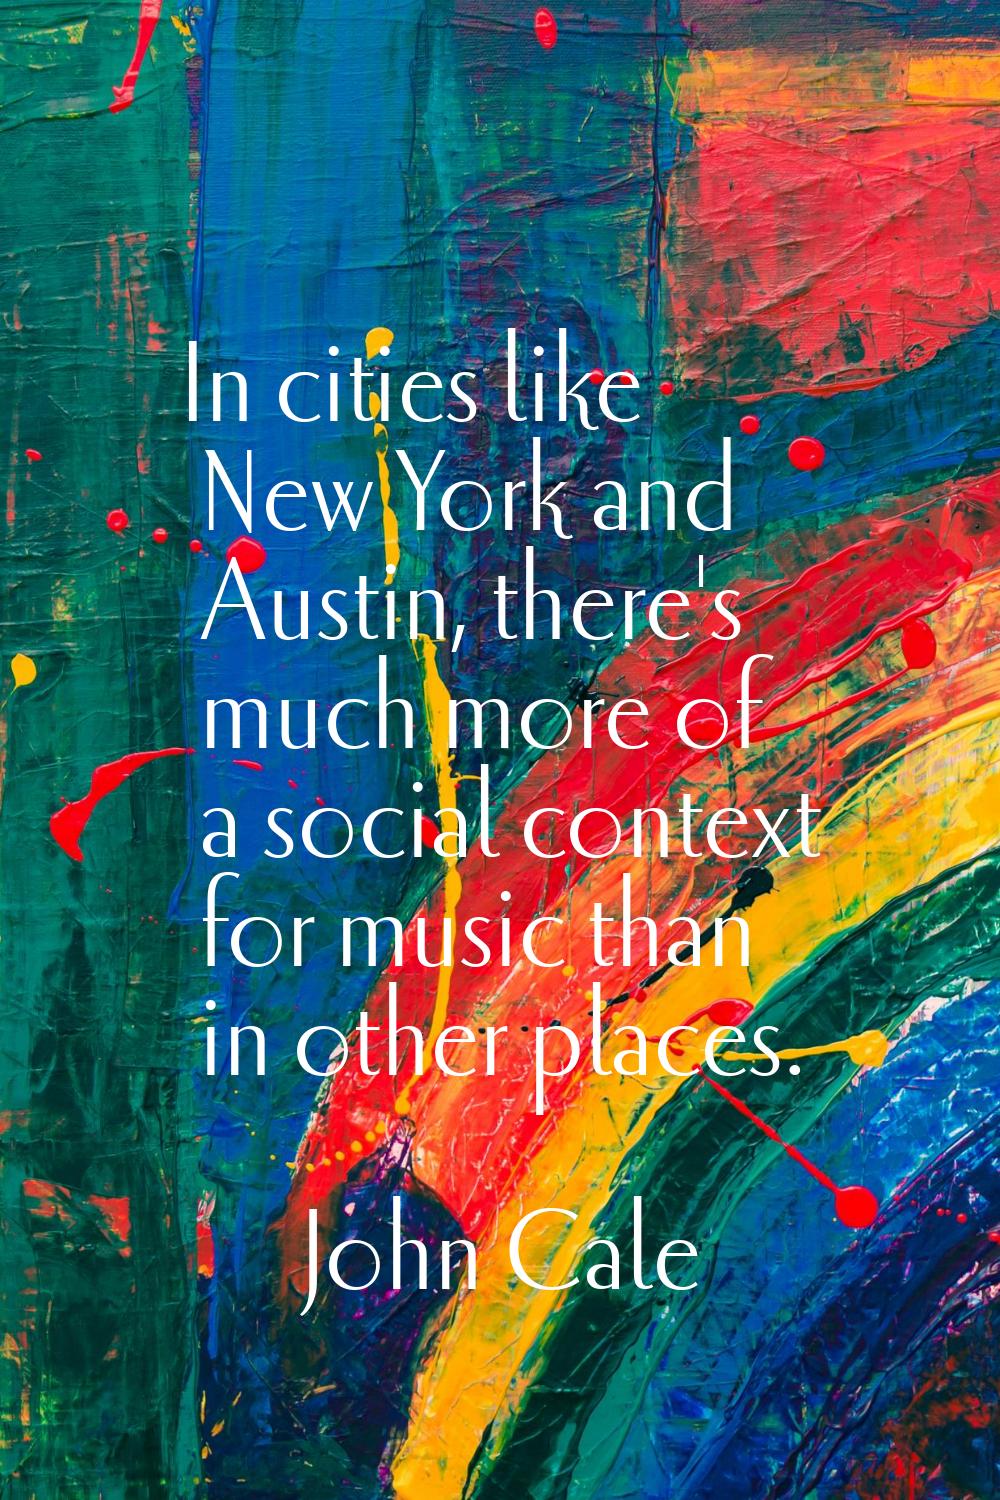 In cities like New York and Austin, there's much more of a social context for music than in other p